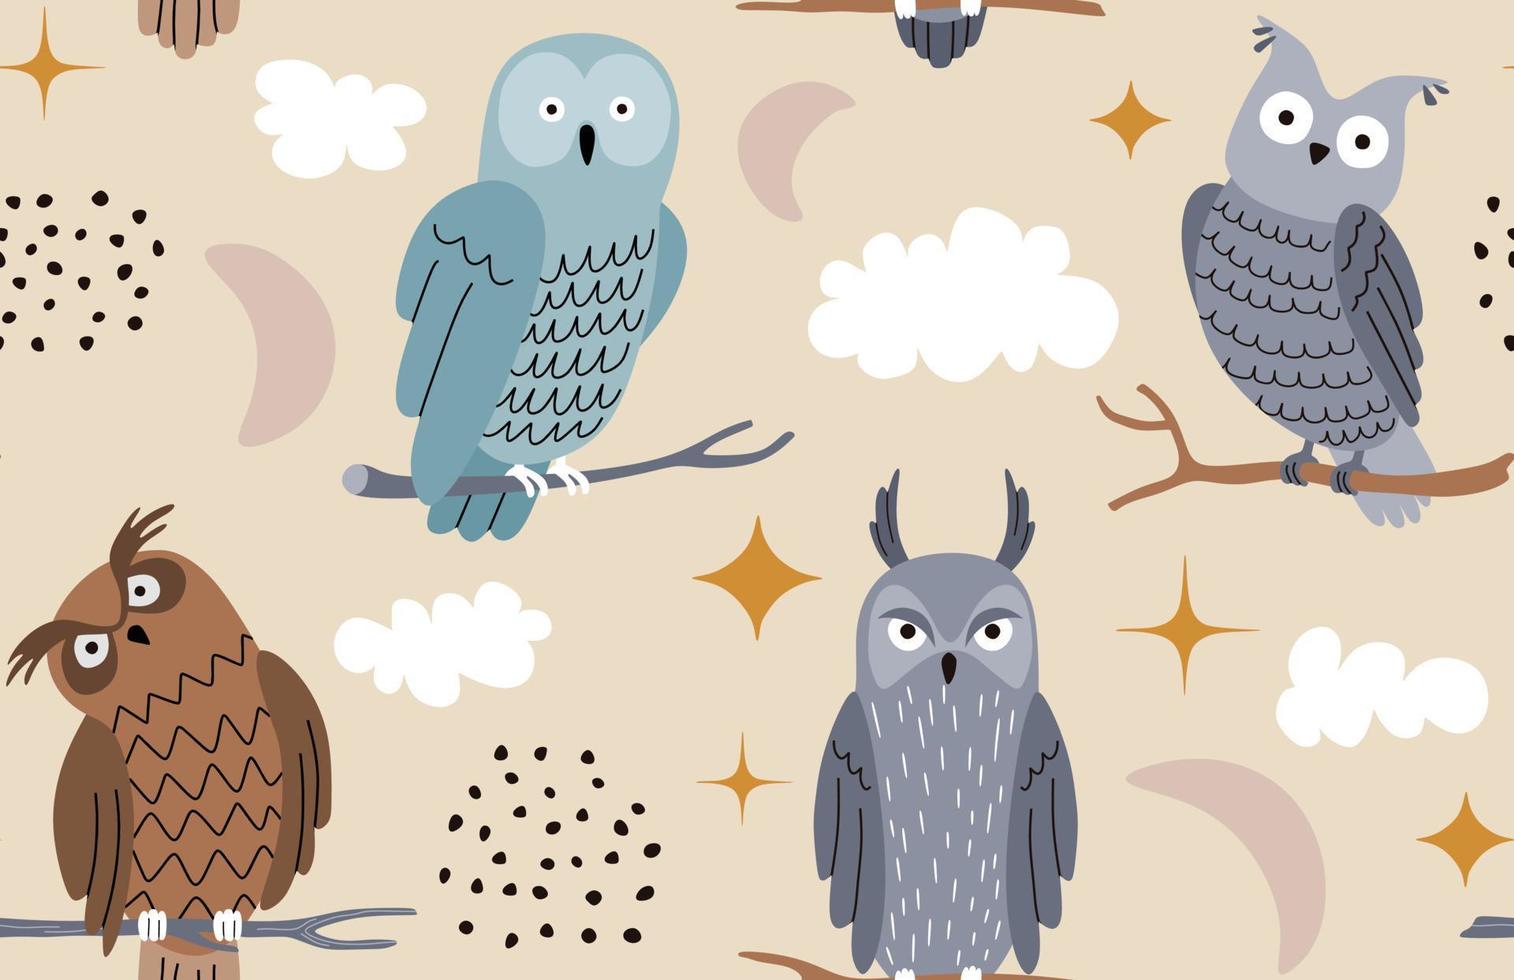 Seamless pattern with owls. vector illustration